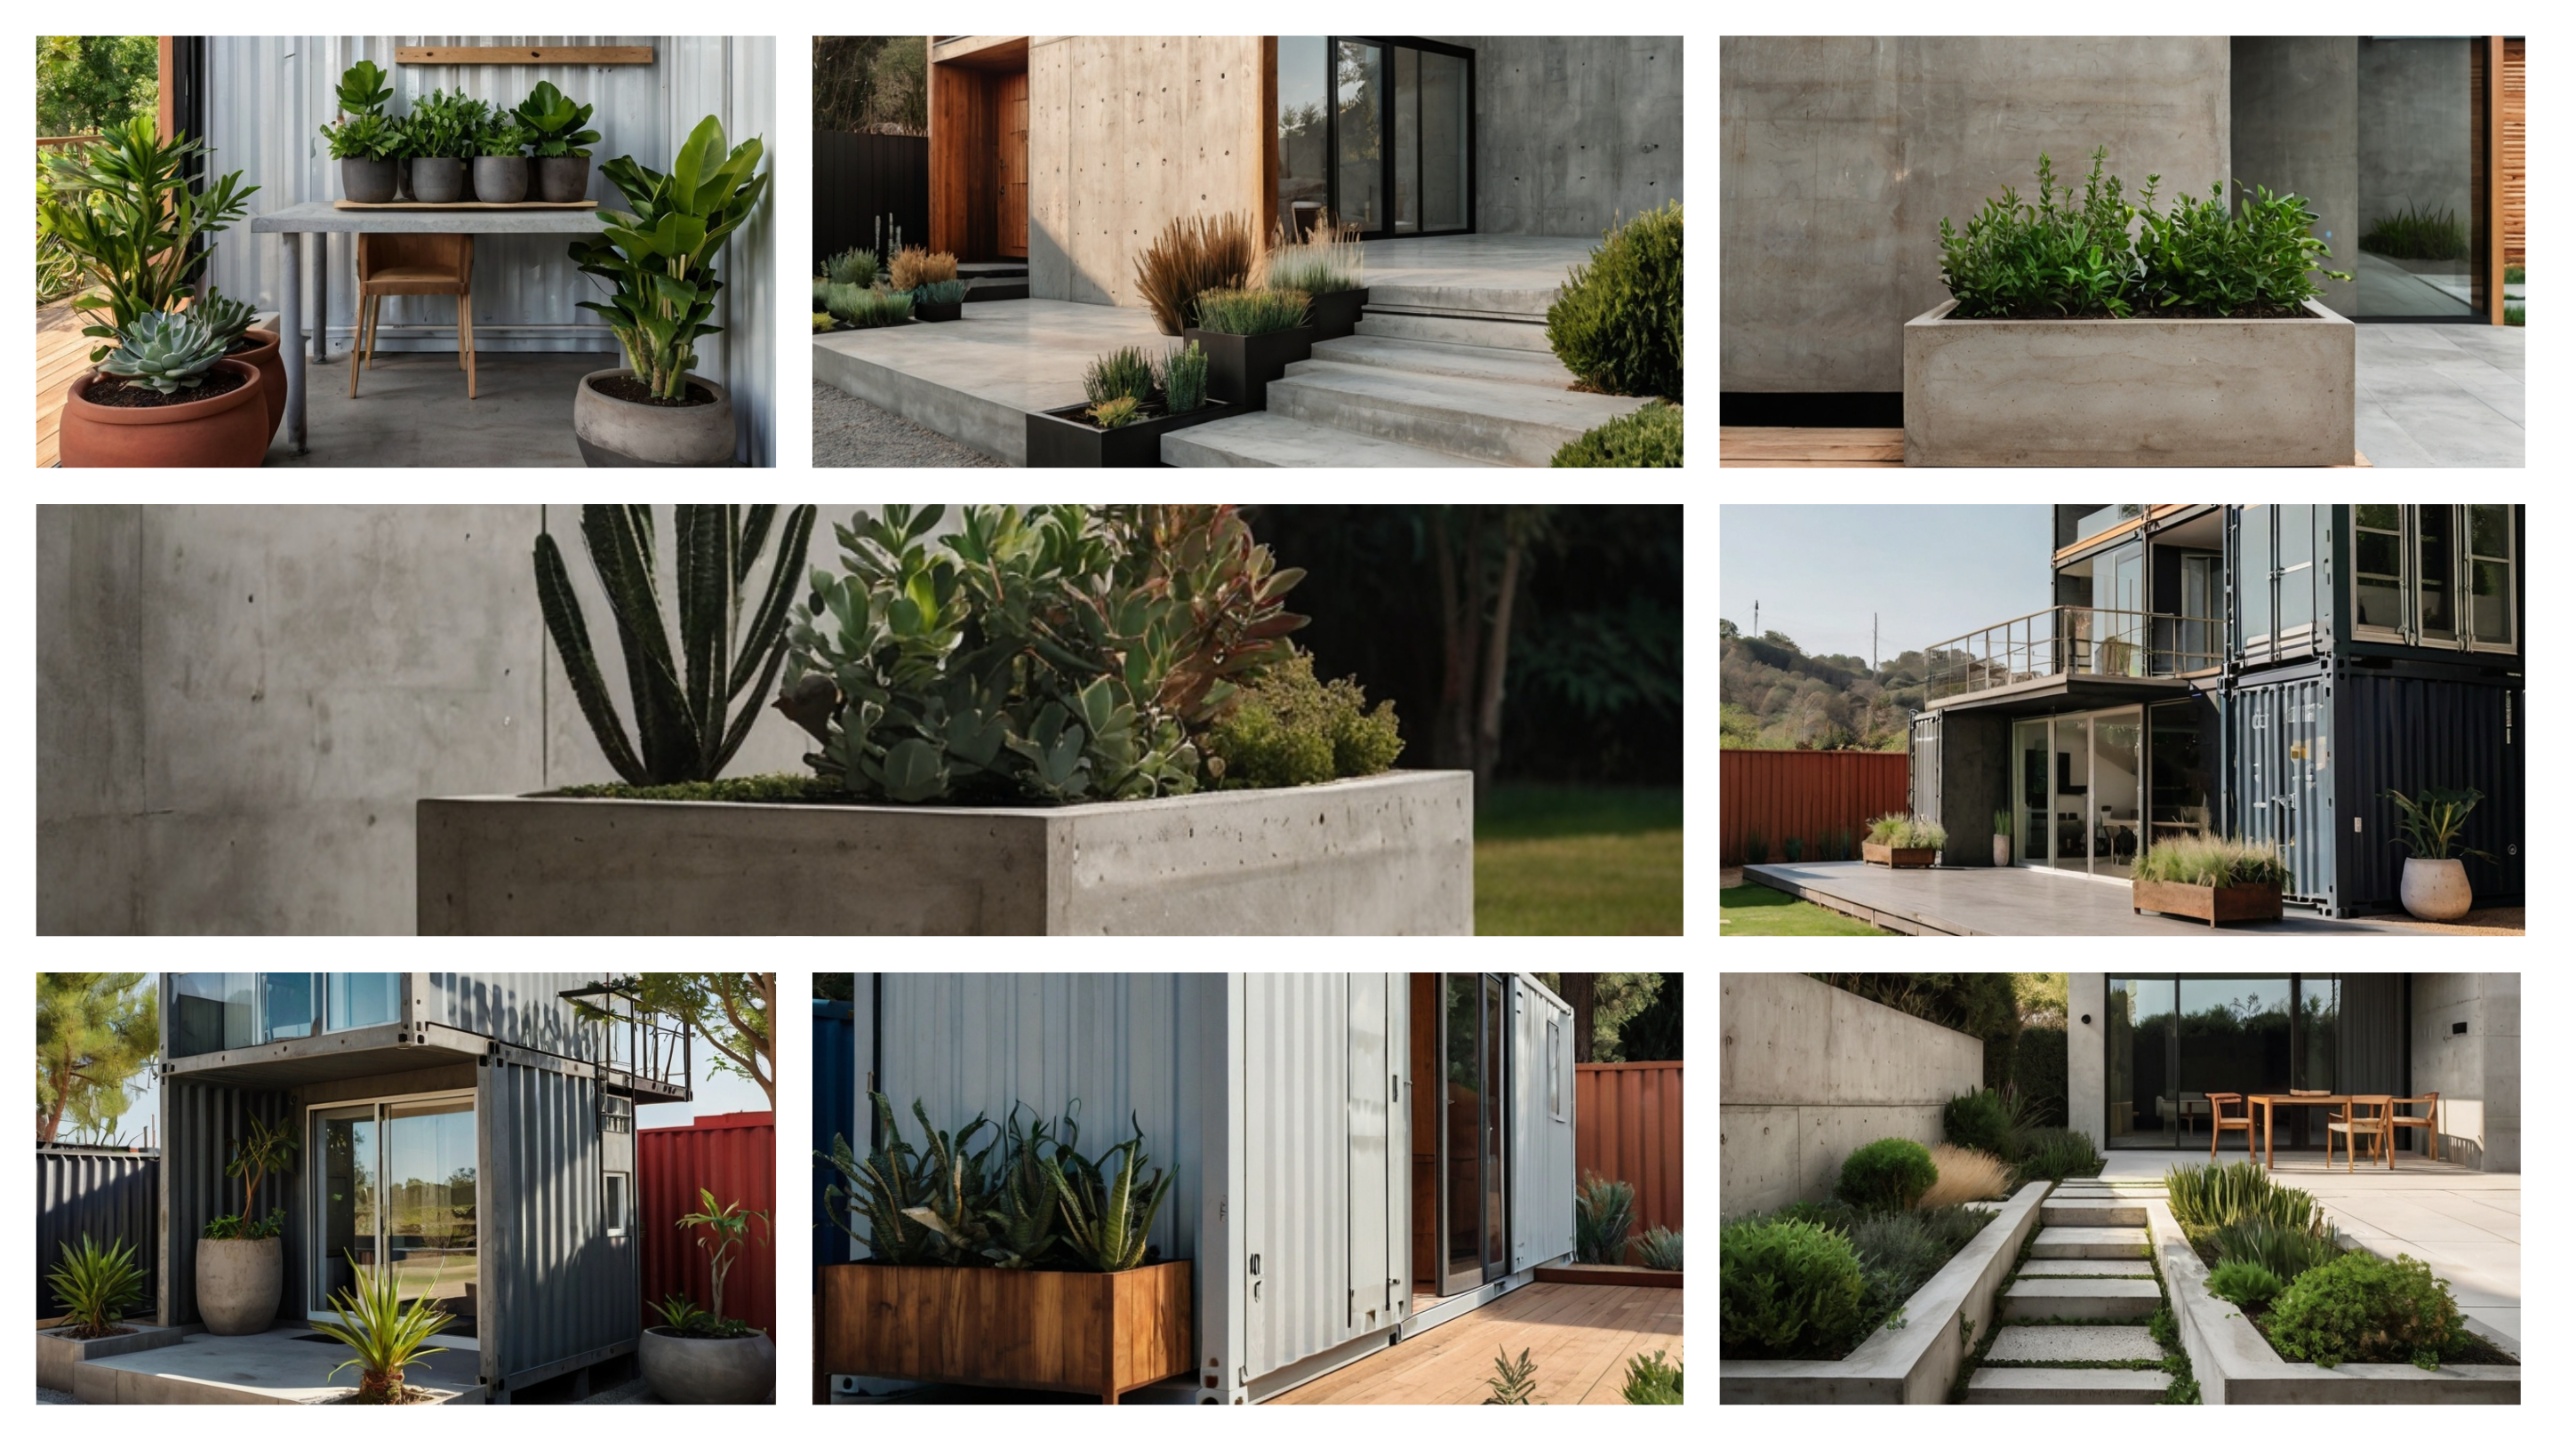 43 Vintage Concrete Planter Ideas for Aesthetic View at Home